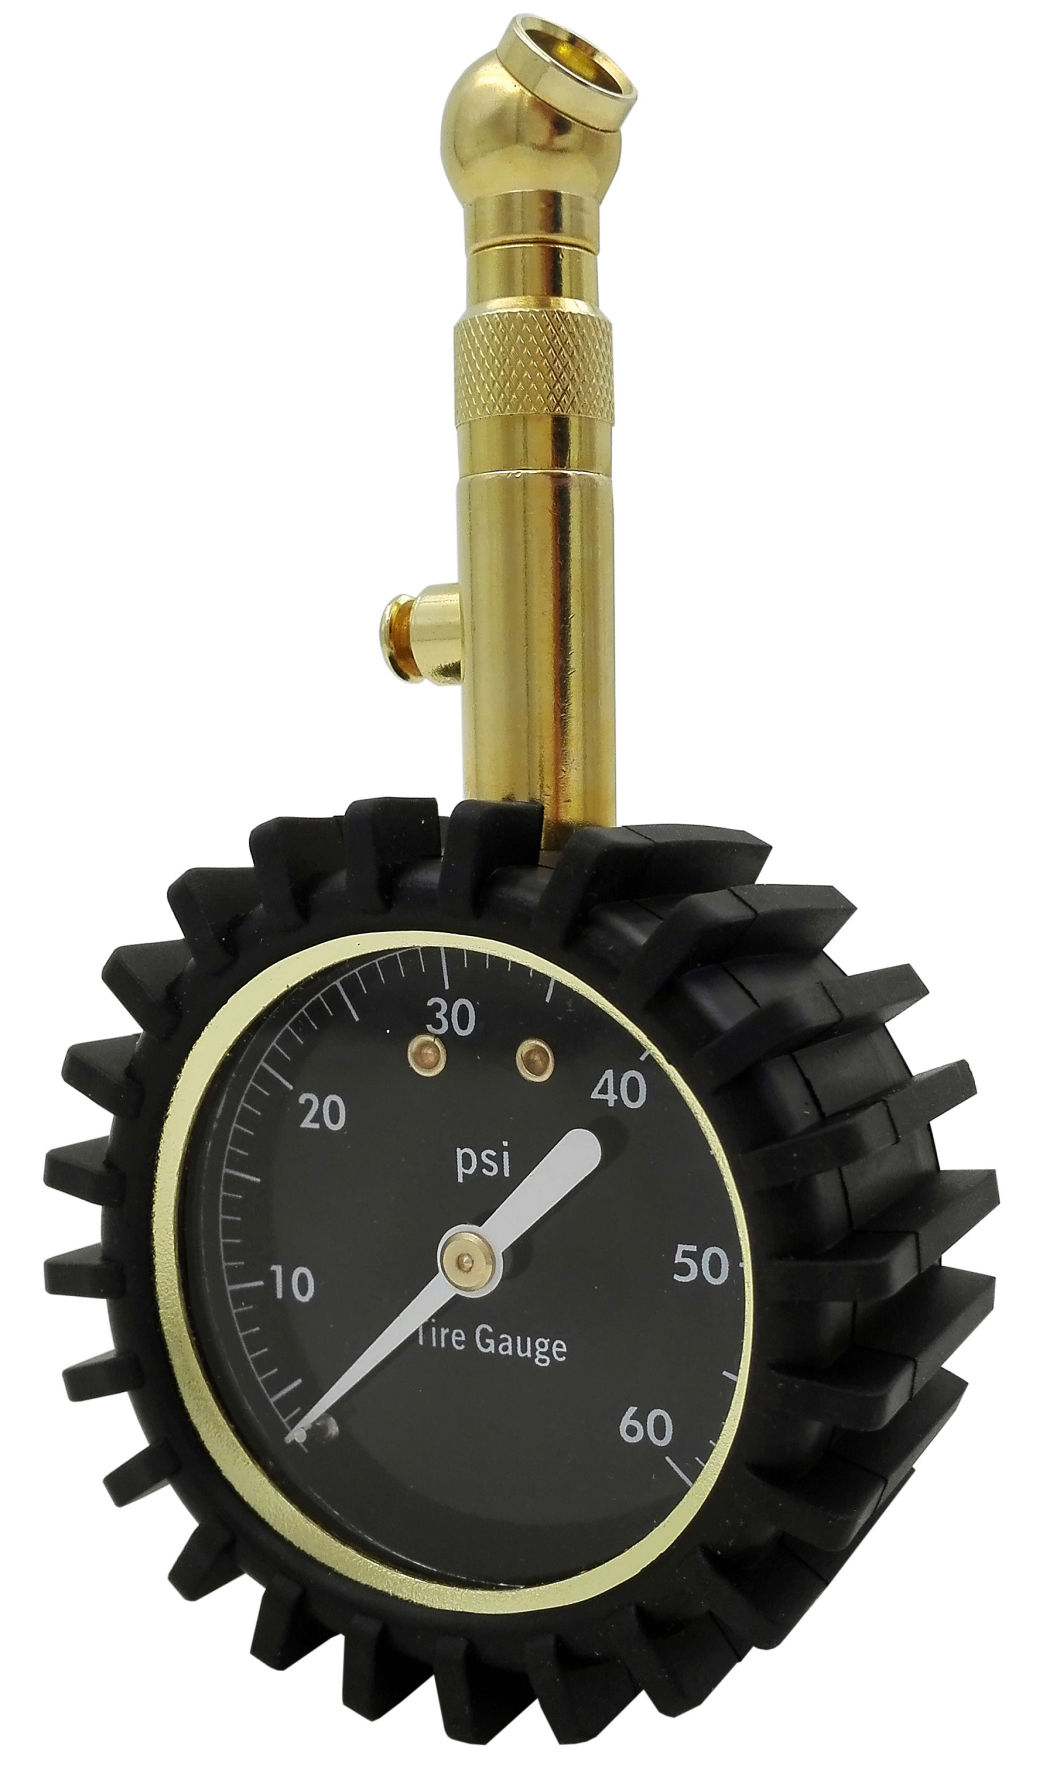 Heavy Duty Reliable & Accurate Air Pressure Gauge for 60 Psi